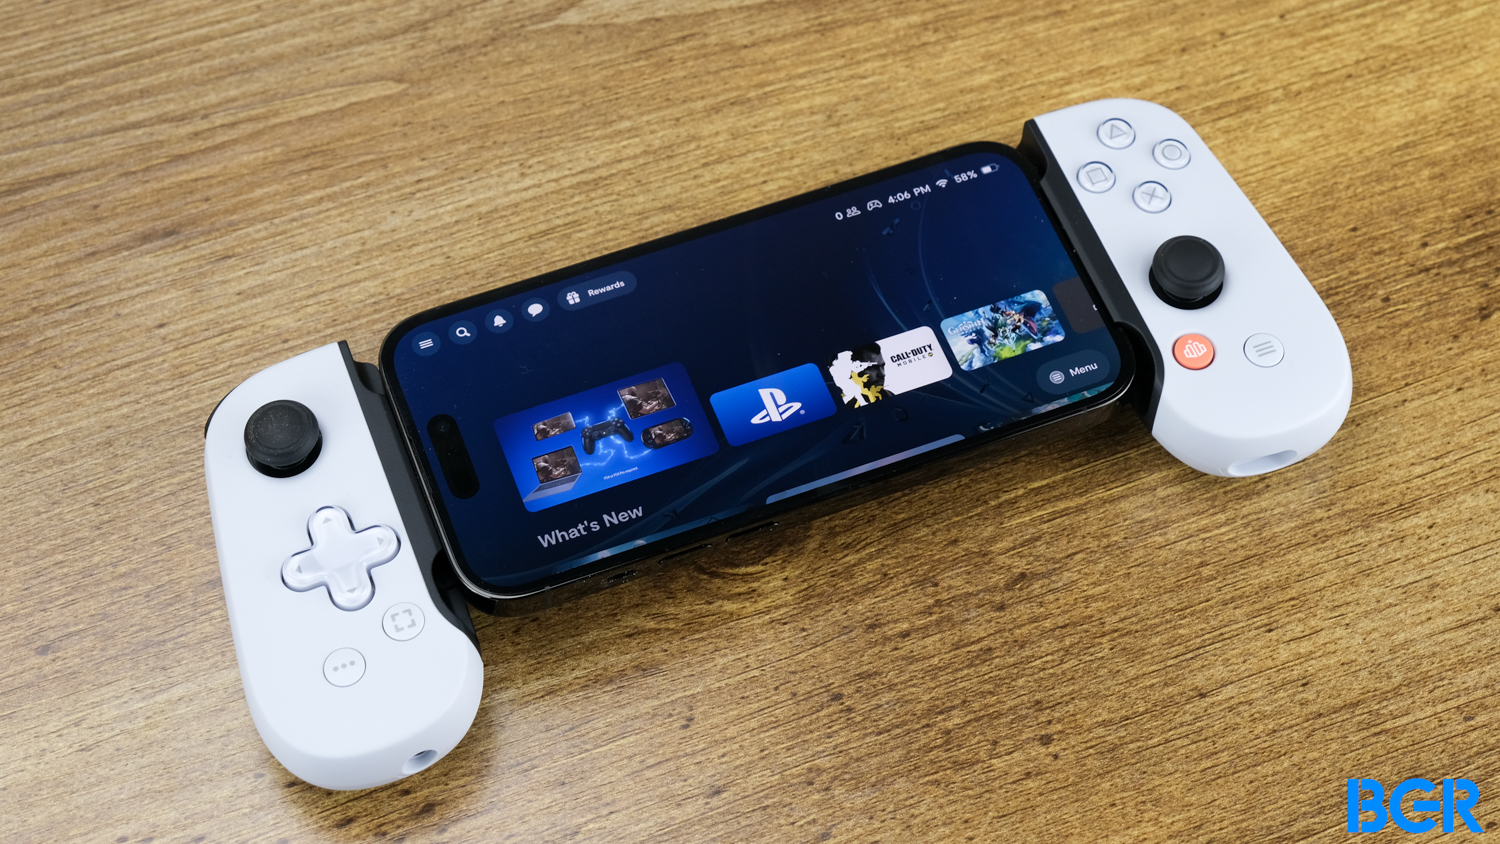 Backbone One mobile controller review, Next-level iPhone gaming